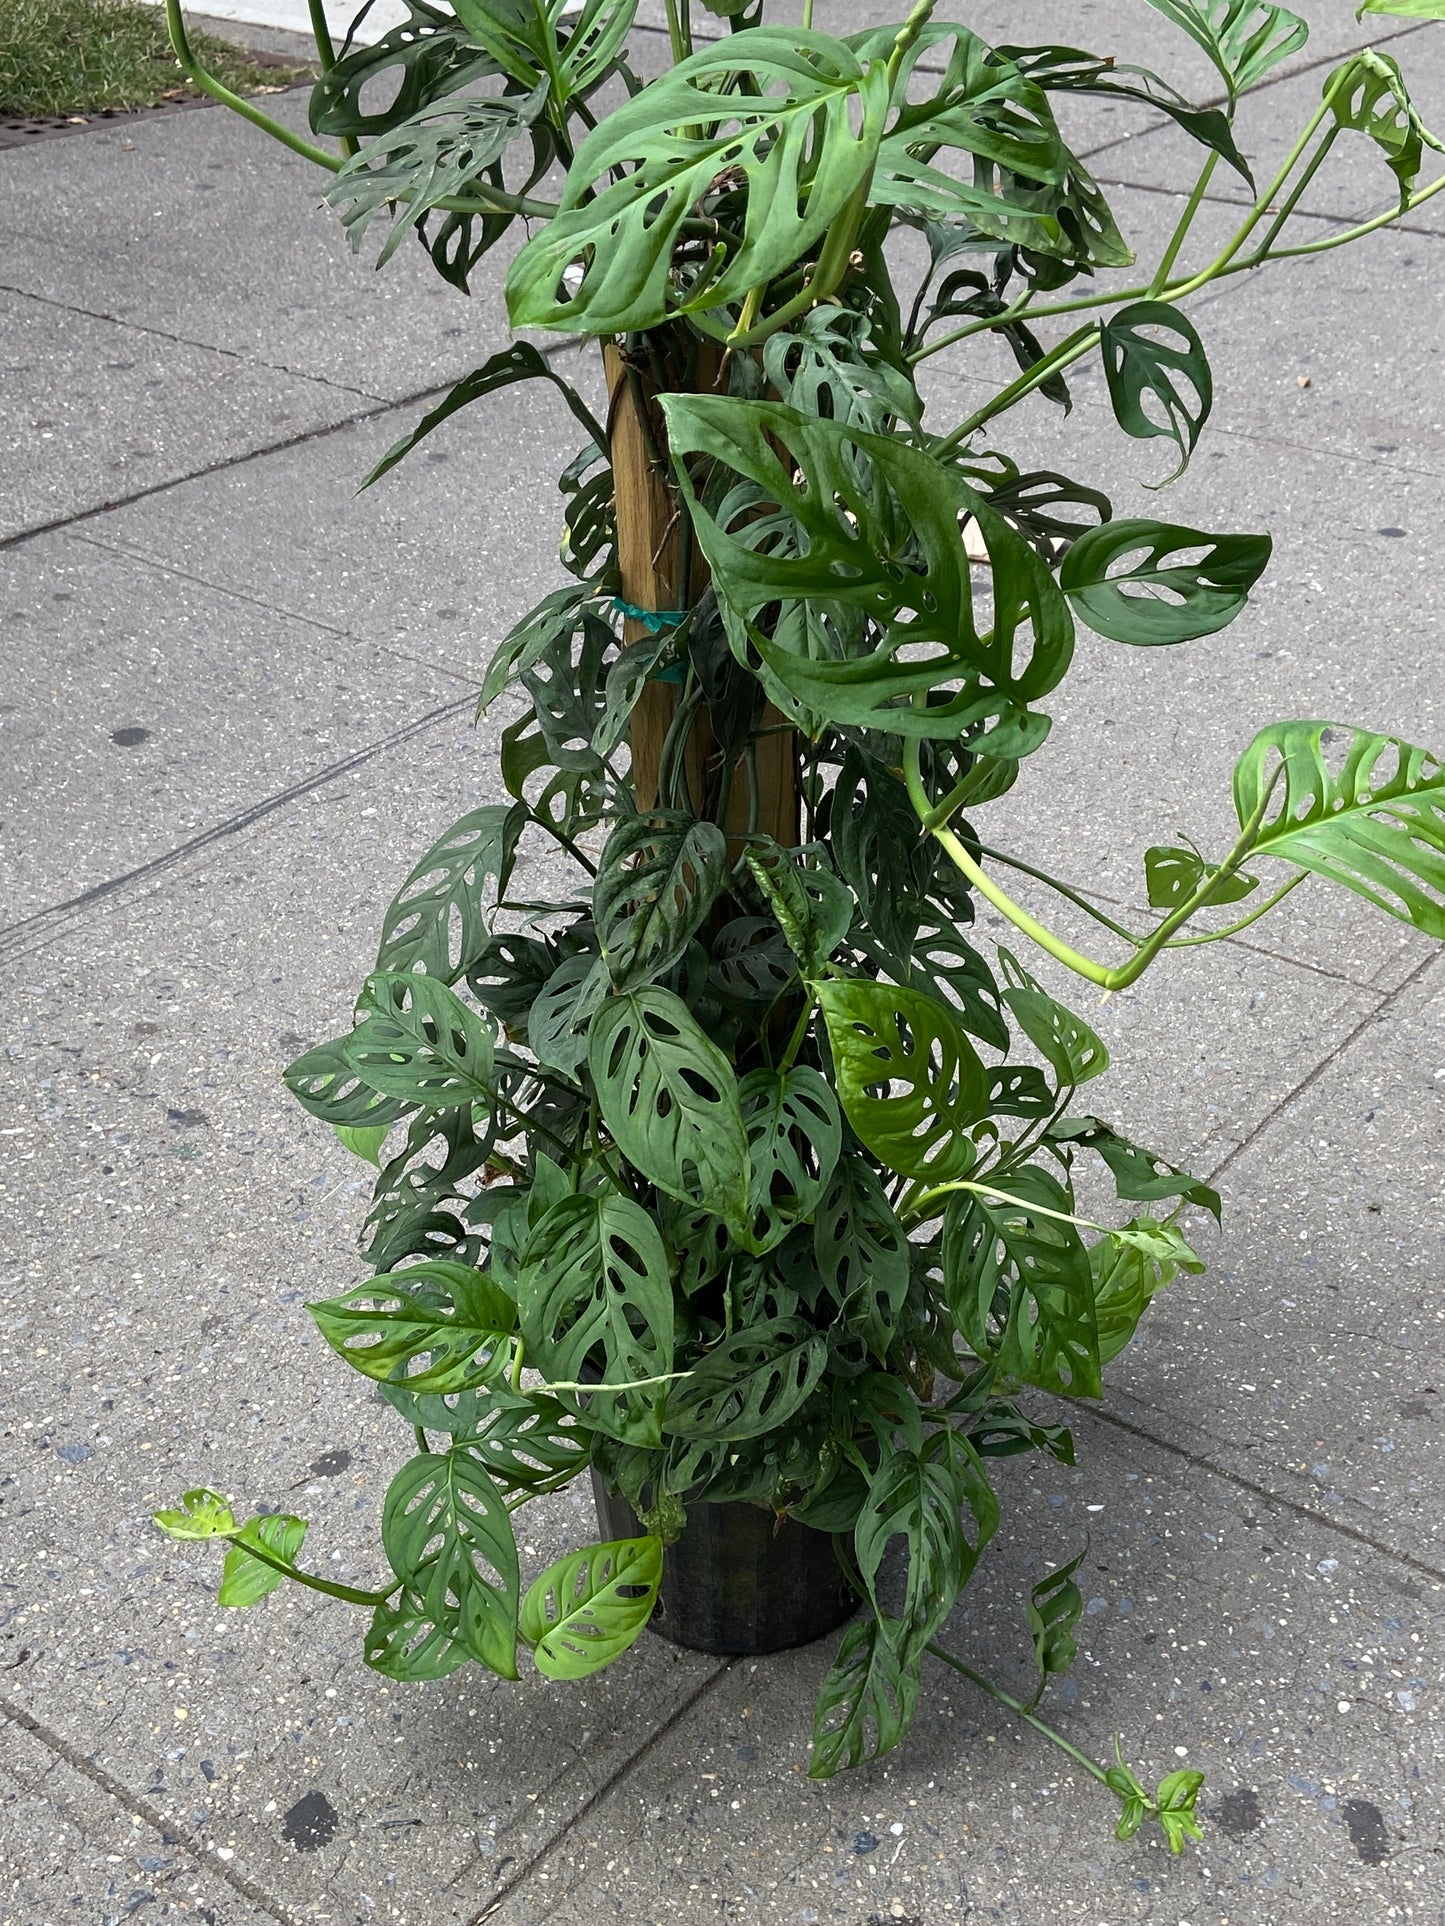 Monstera Adansonii "Swiss Cheese" Plant - 8" Pole Container